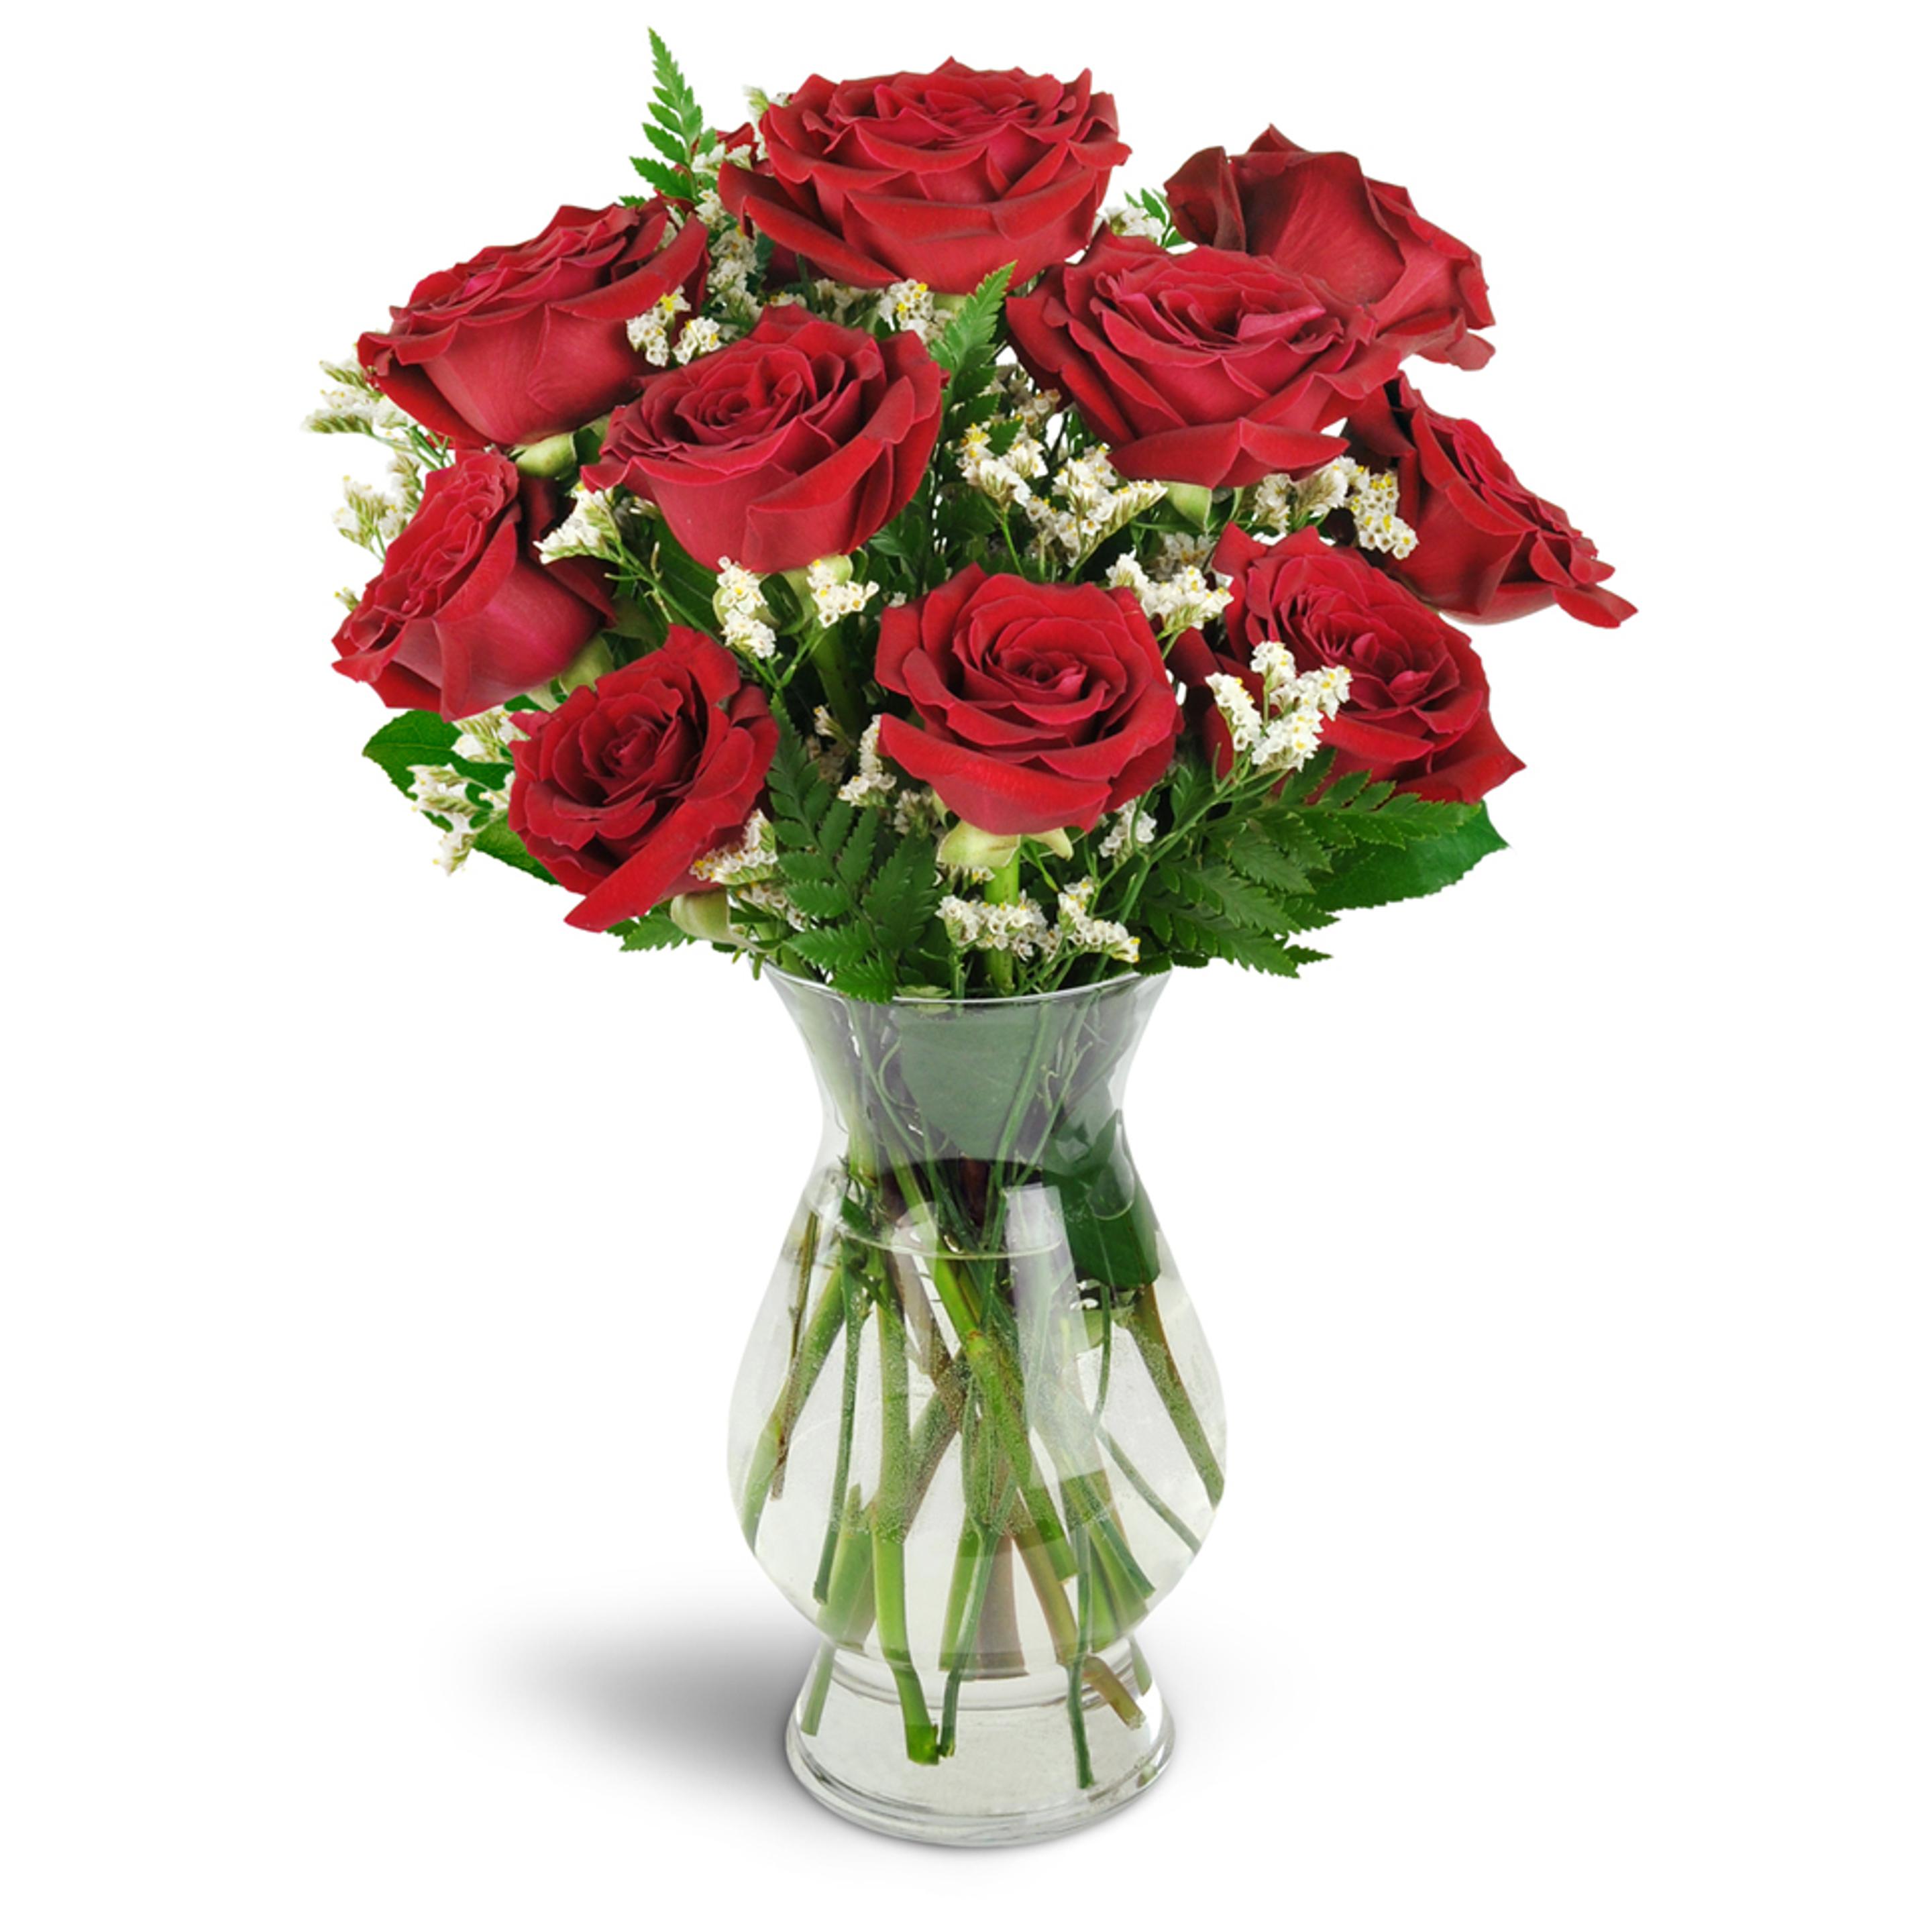 Red Roses in a clear vase to celebrate a romantic birthday